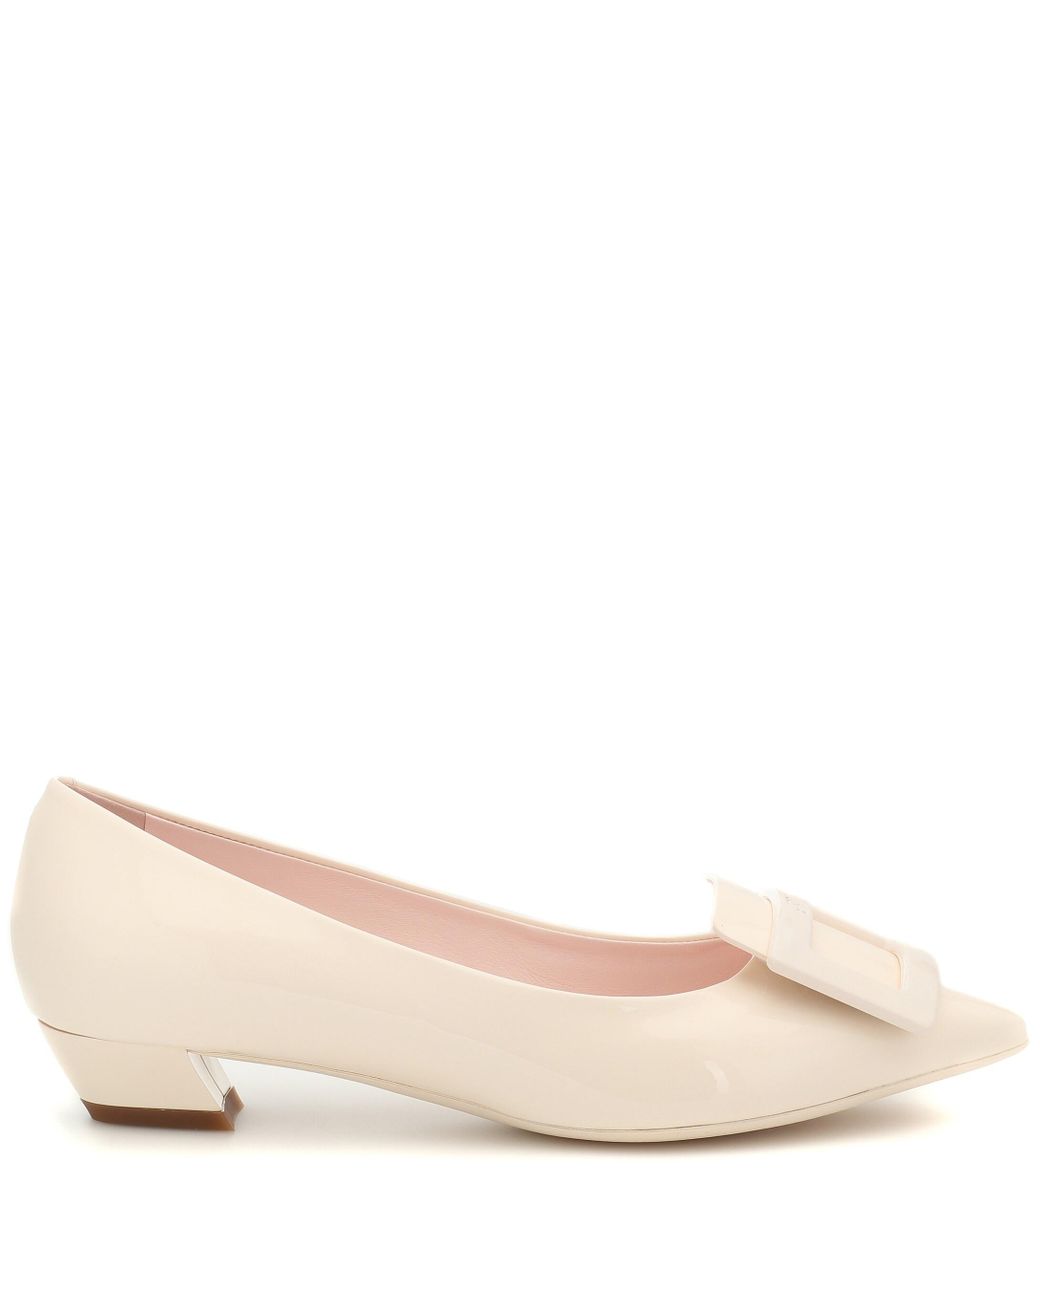 Roger Vivier Gommetine Leather Ballet Flats in White | Lyst